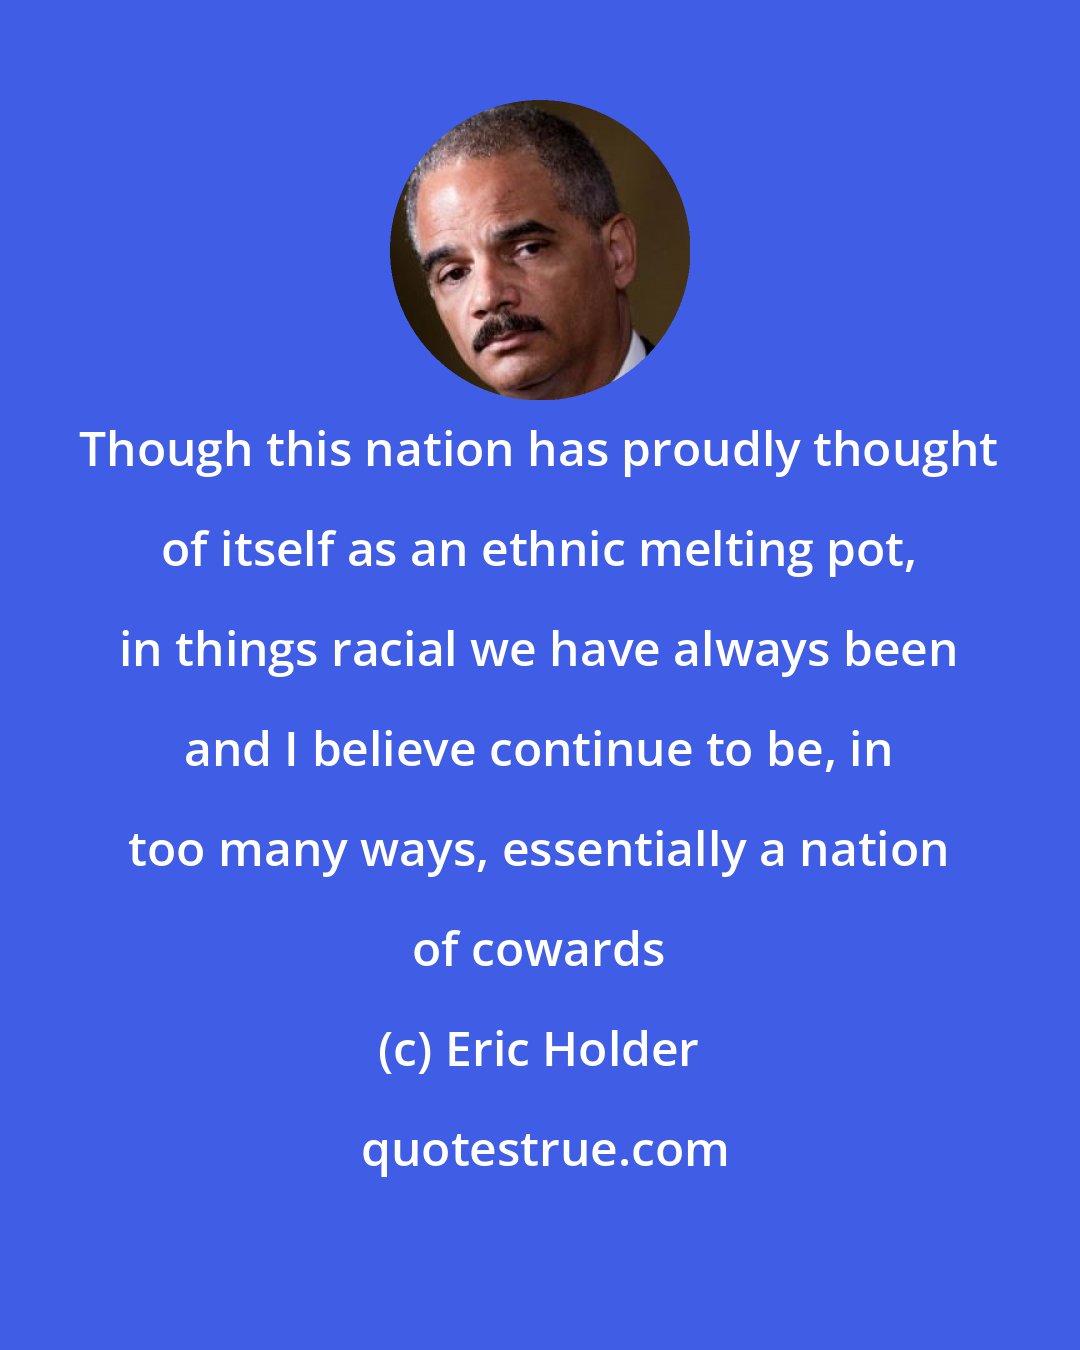 Eric Holder: Though this nation has proudly thought of itself as an ethnic melting pot, in things racial we have always been and I believe continue to be, in too many ways, essentially a nation of cowards